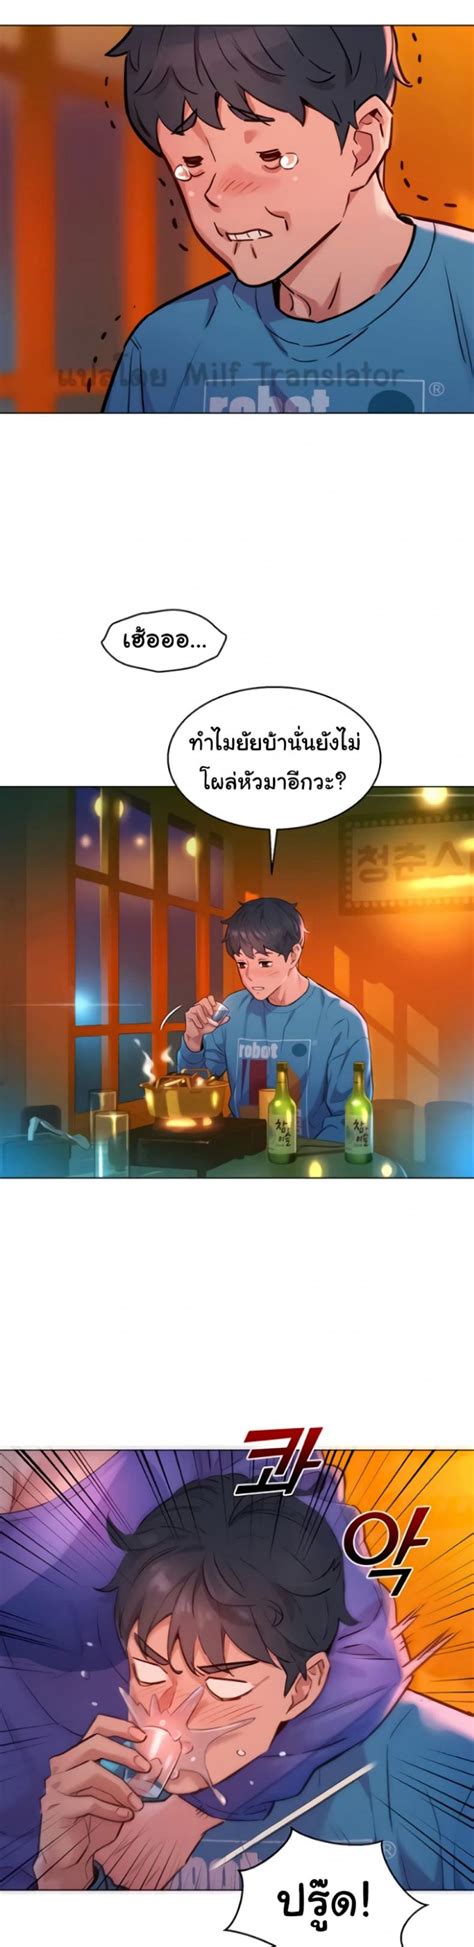 Lets Hang Out From Today Manhwa Thai